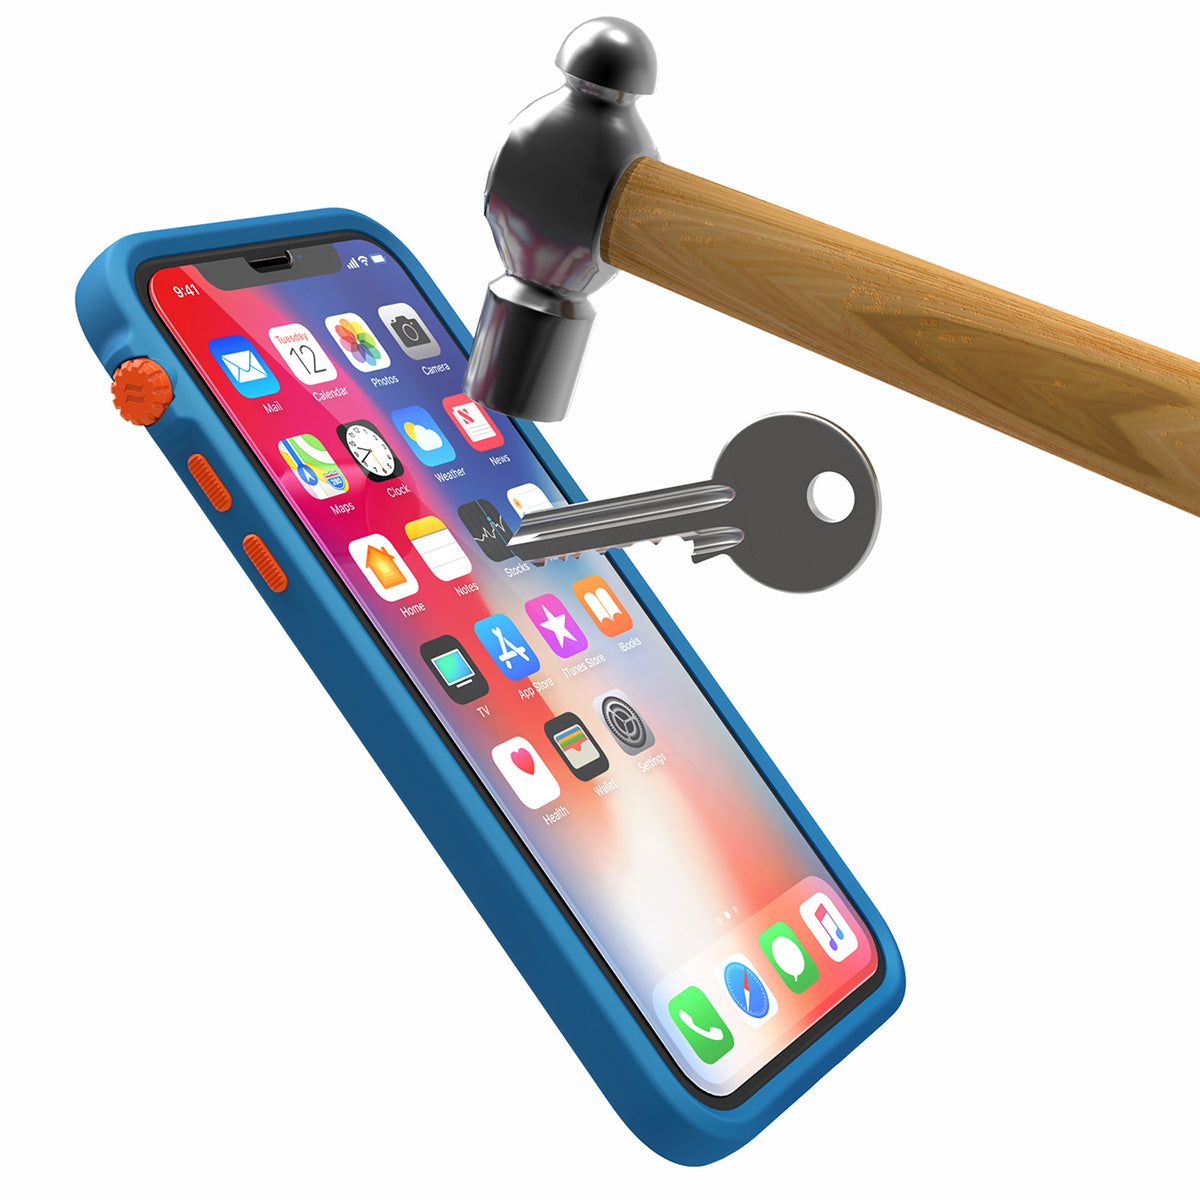 Catalyst Add a Tempered Glass Screen Protector on iphone and catalyst influence case with hammer and key.